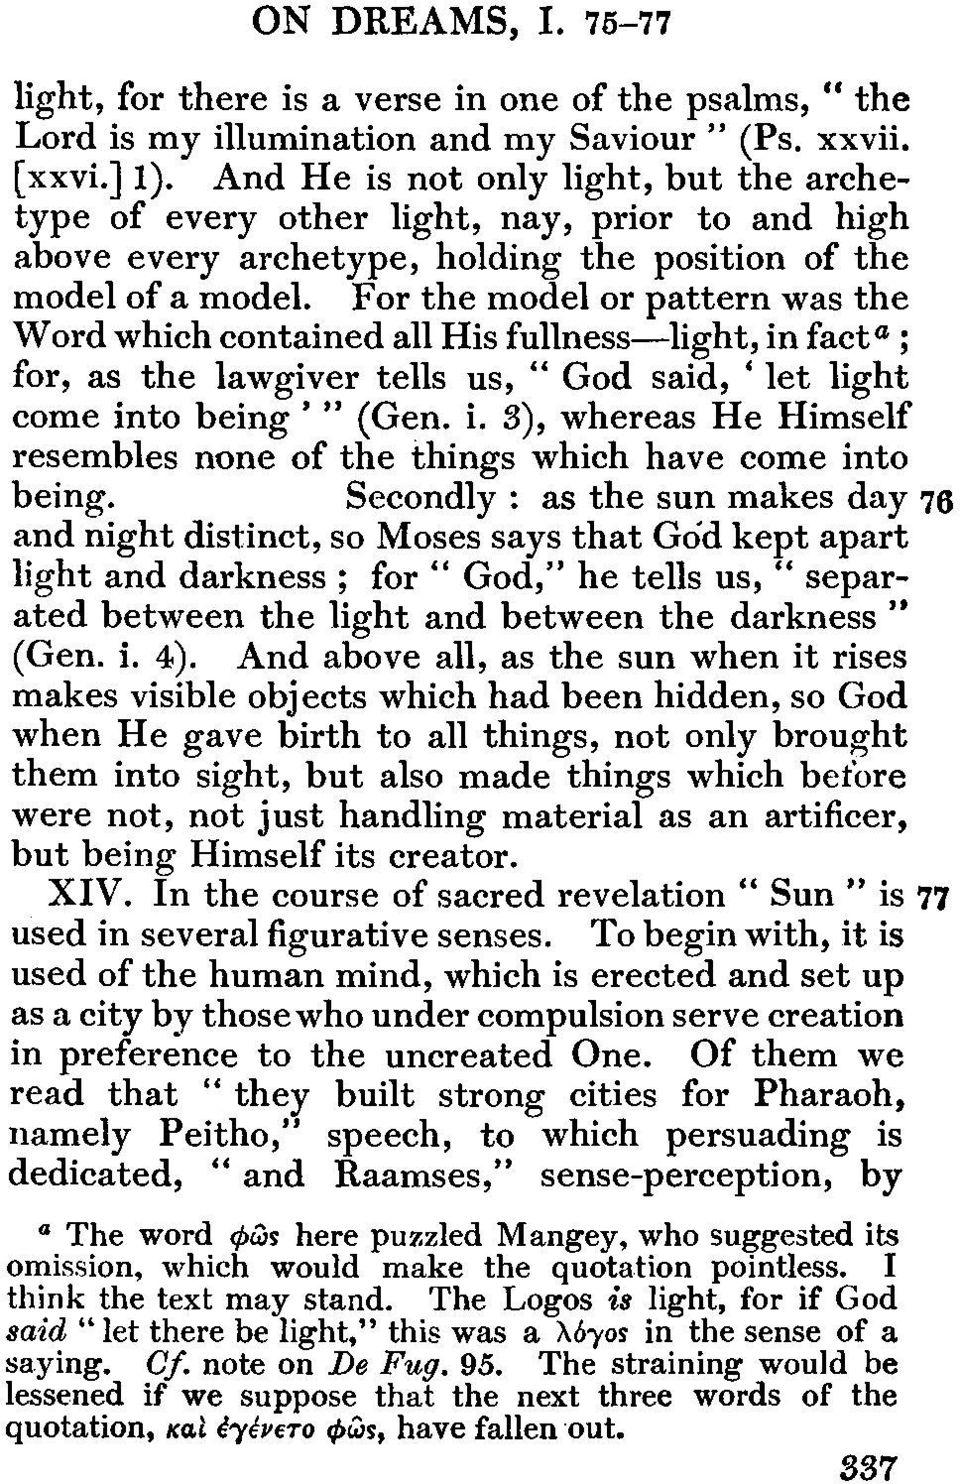 For the model or pattern was the Word which contained all His fullness light, in fact a ; for, as the lawgiver tells us, " God said, ' let light come into being ' " (Gen. i. 3), whereas He Himself resembles none of the things which have come into being.